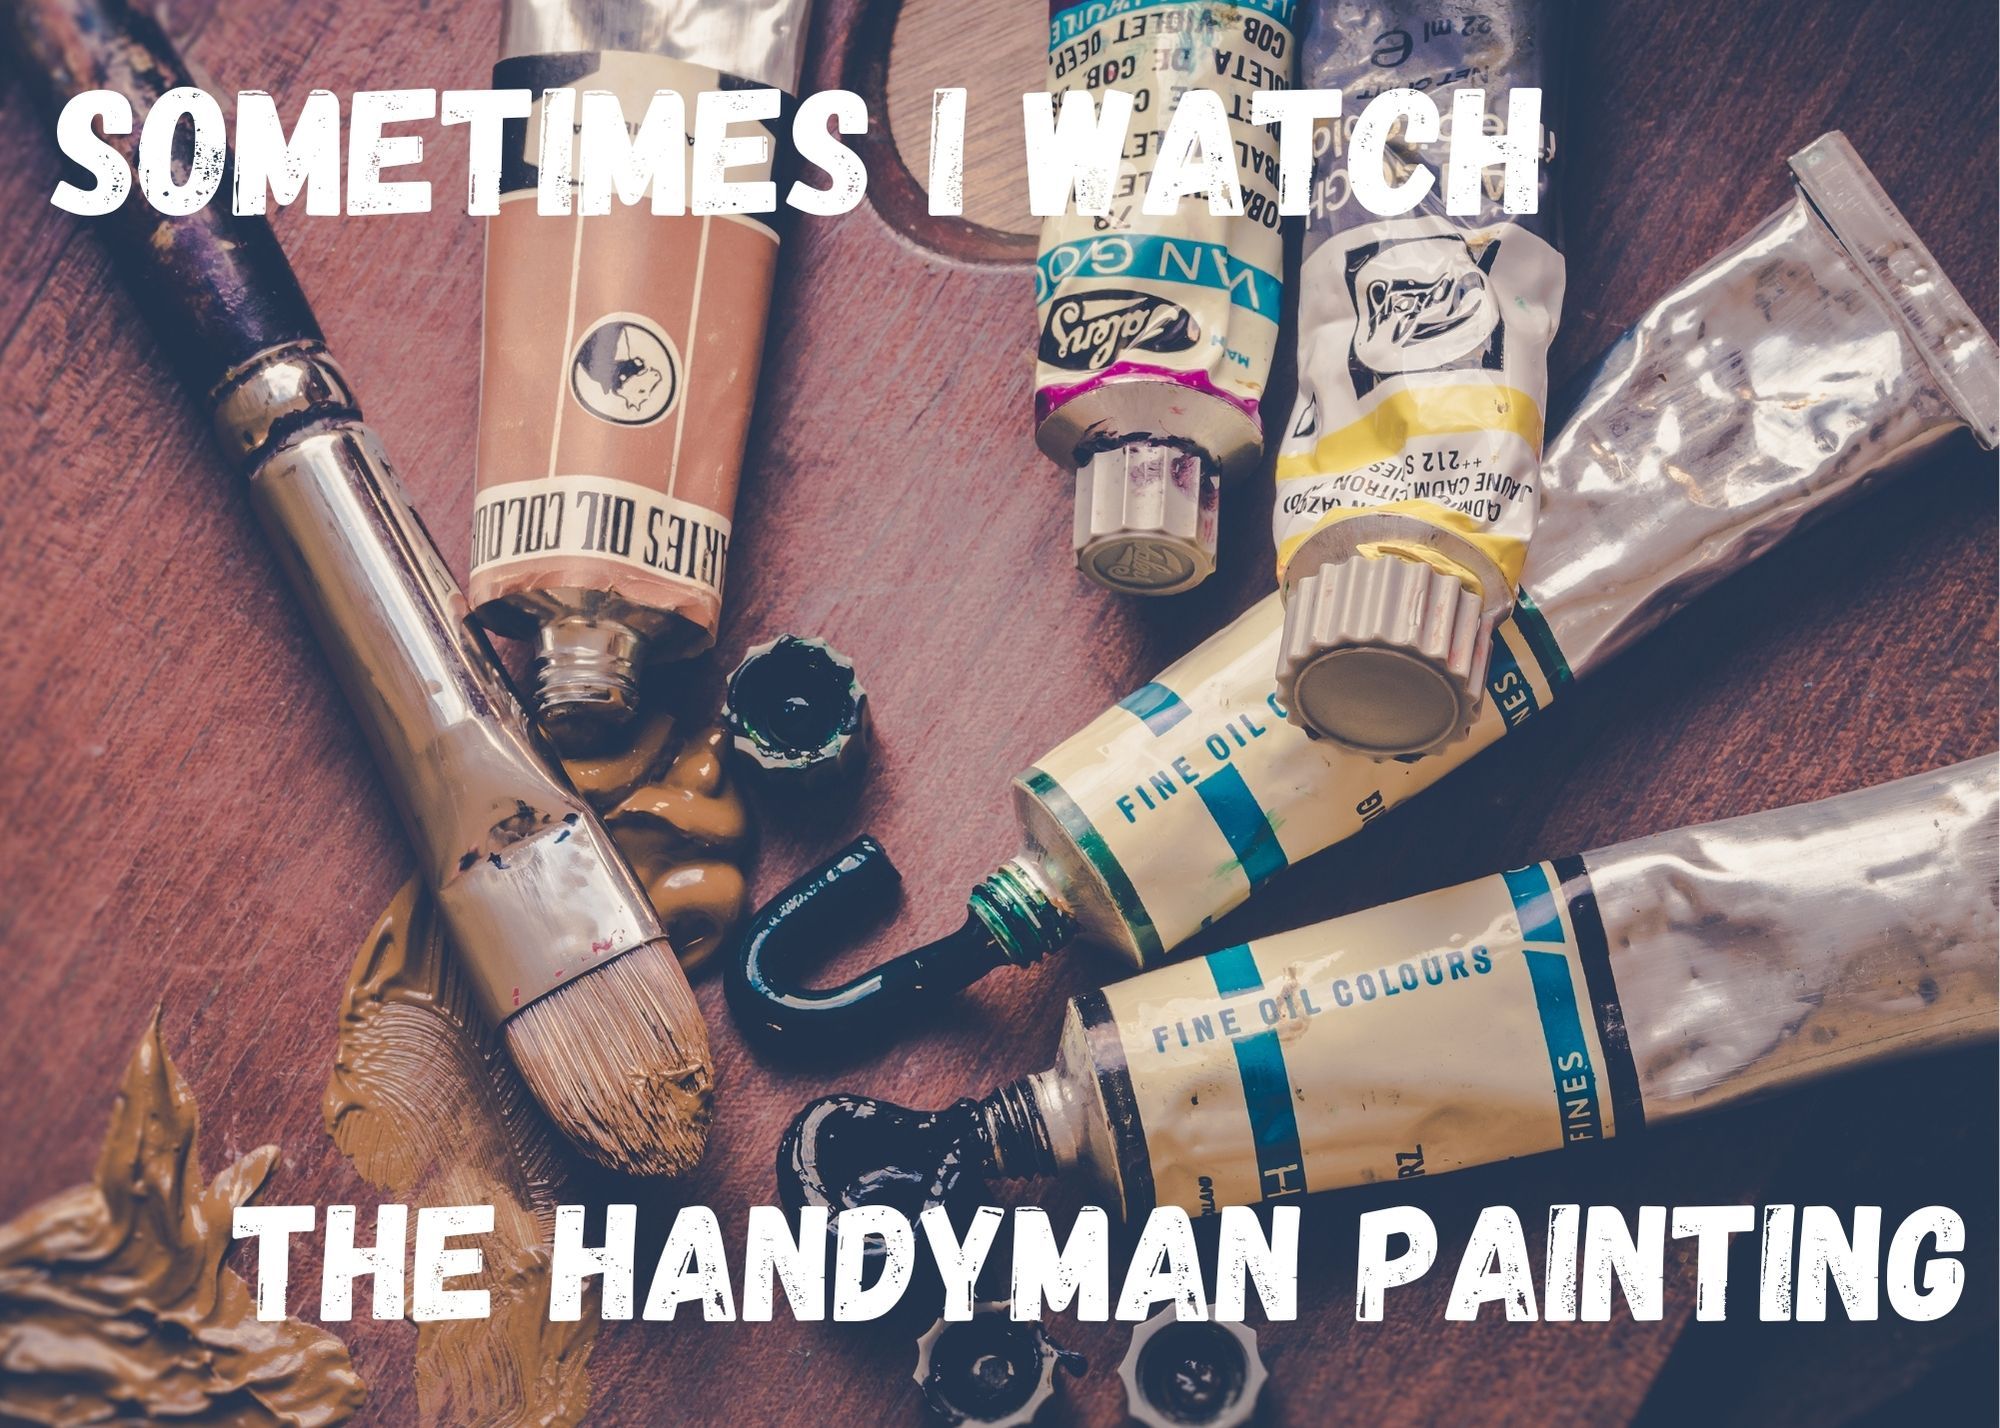 Image of oil paint tubes and brushes, with the words "Sometimes I watch the handyman painting"